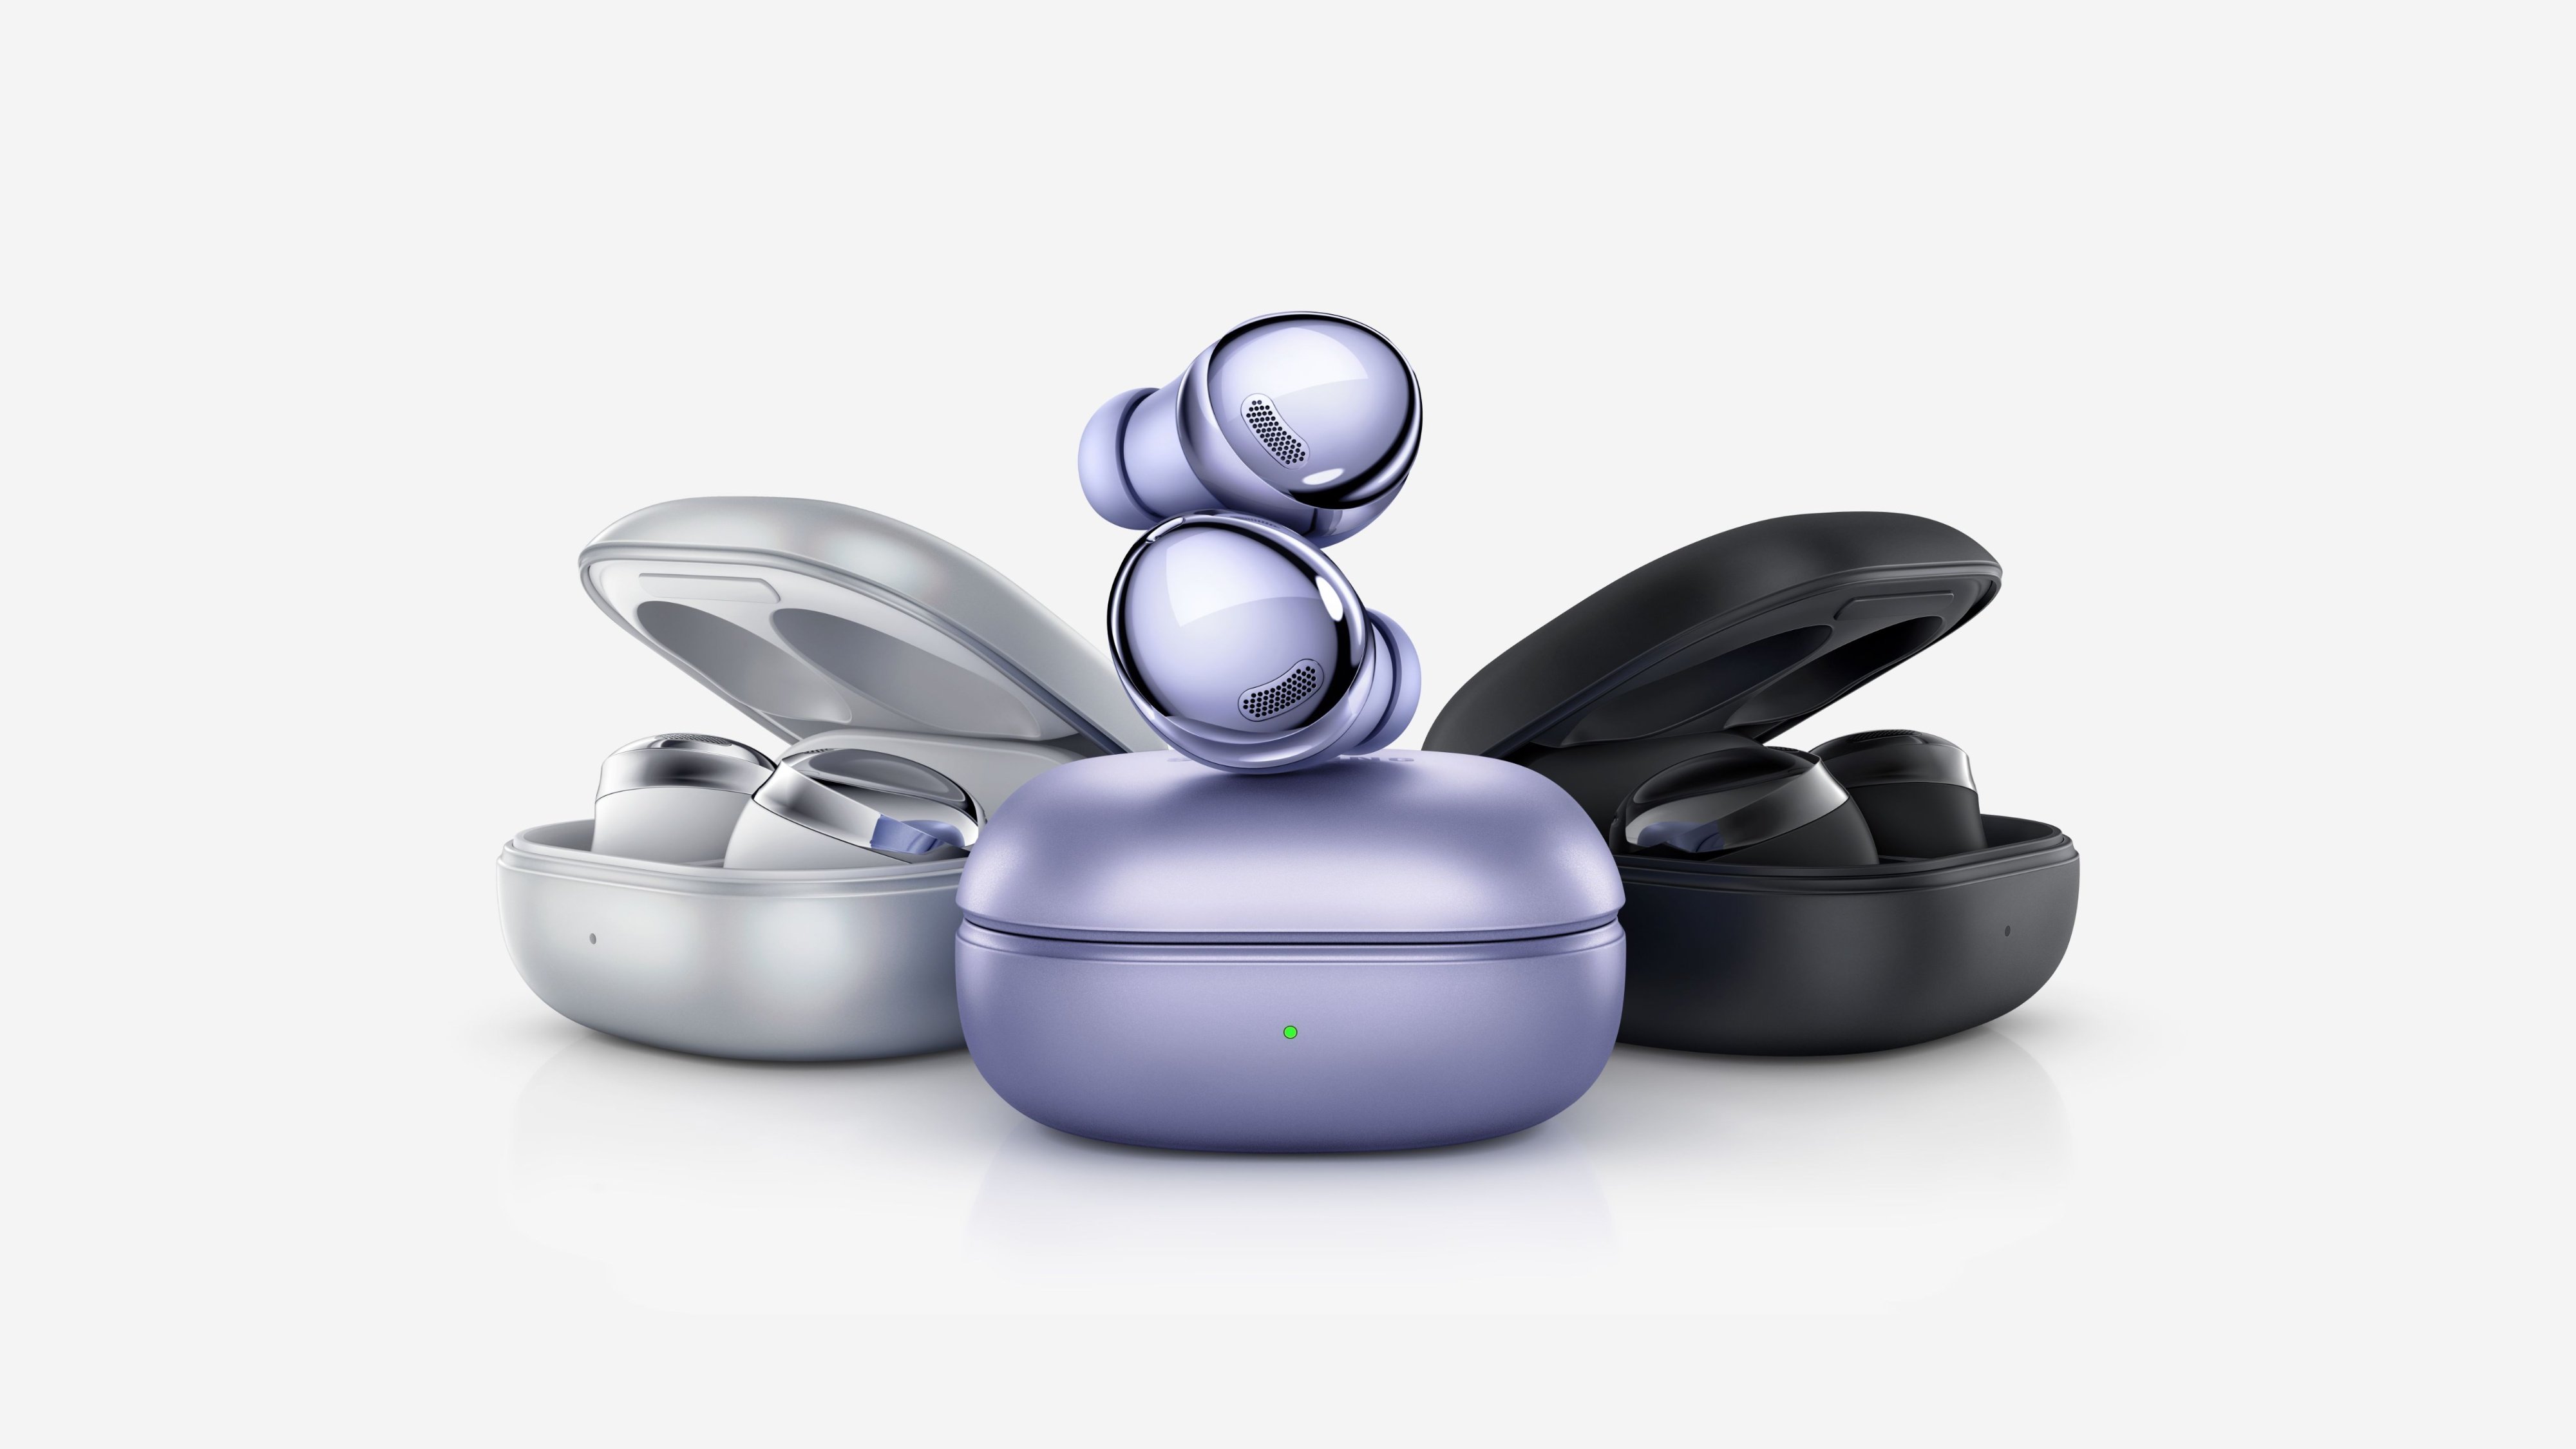 Samsung Galaxy Buds Pro in Black, Silver, and Violet,